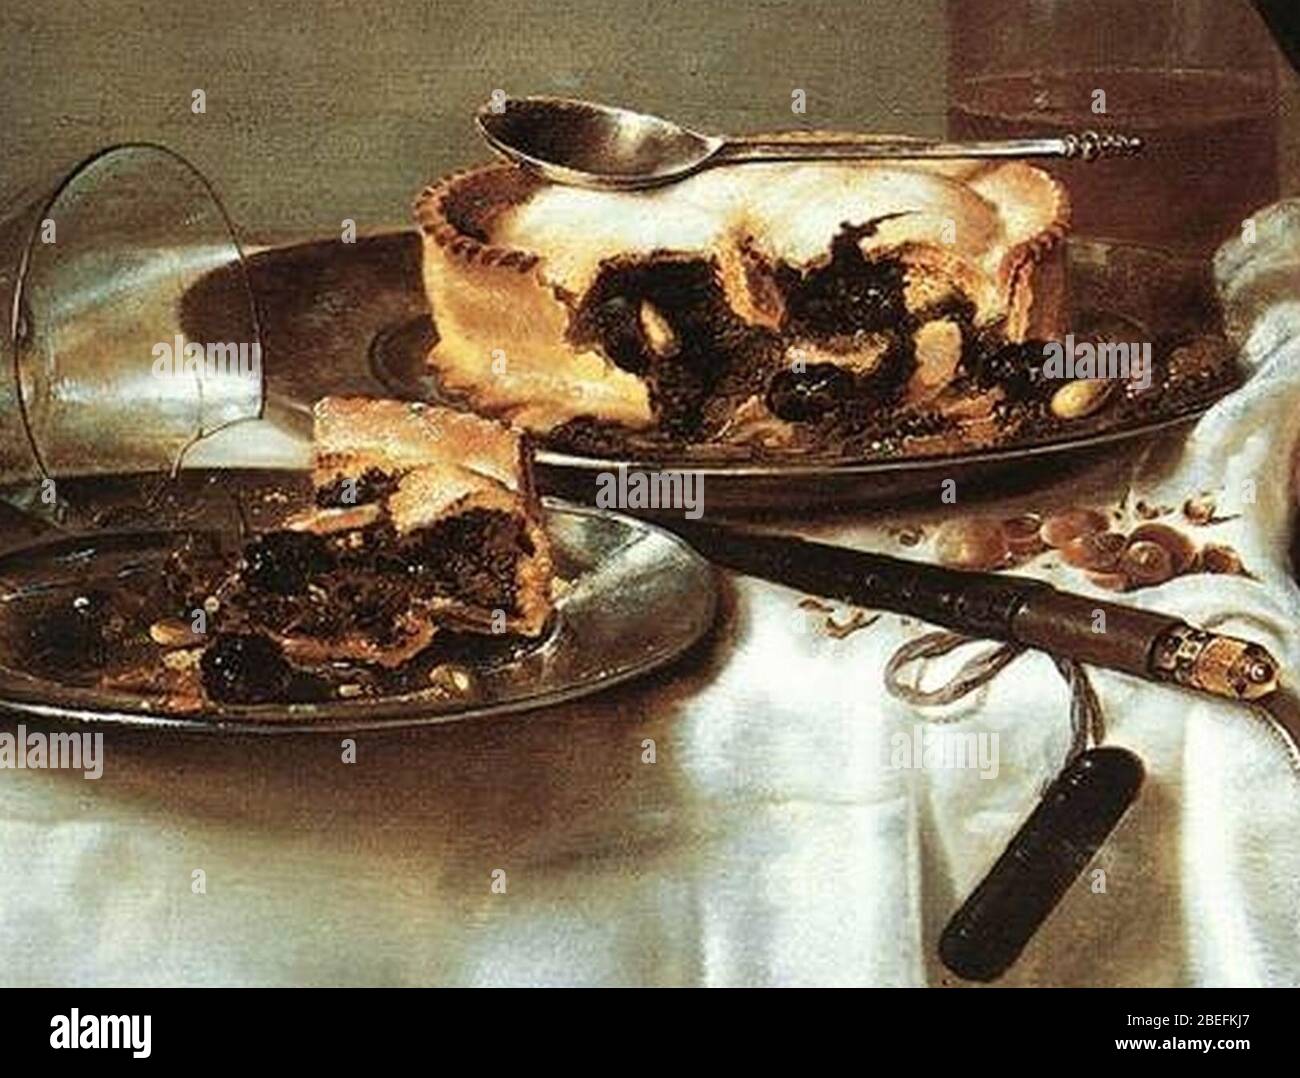 Heda Willem Claeszoon - Breakfast Table with Blackberry Pie - detail pie. Stock Photo